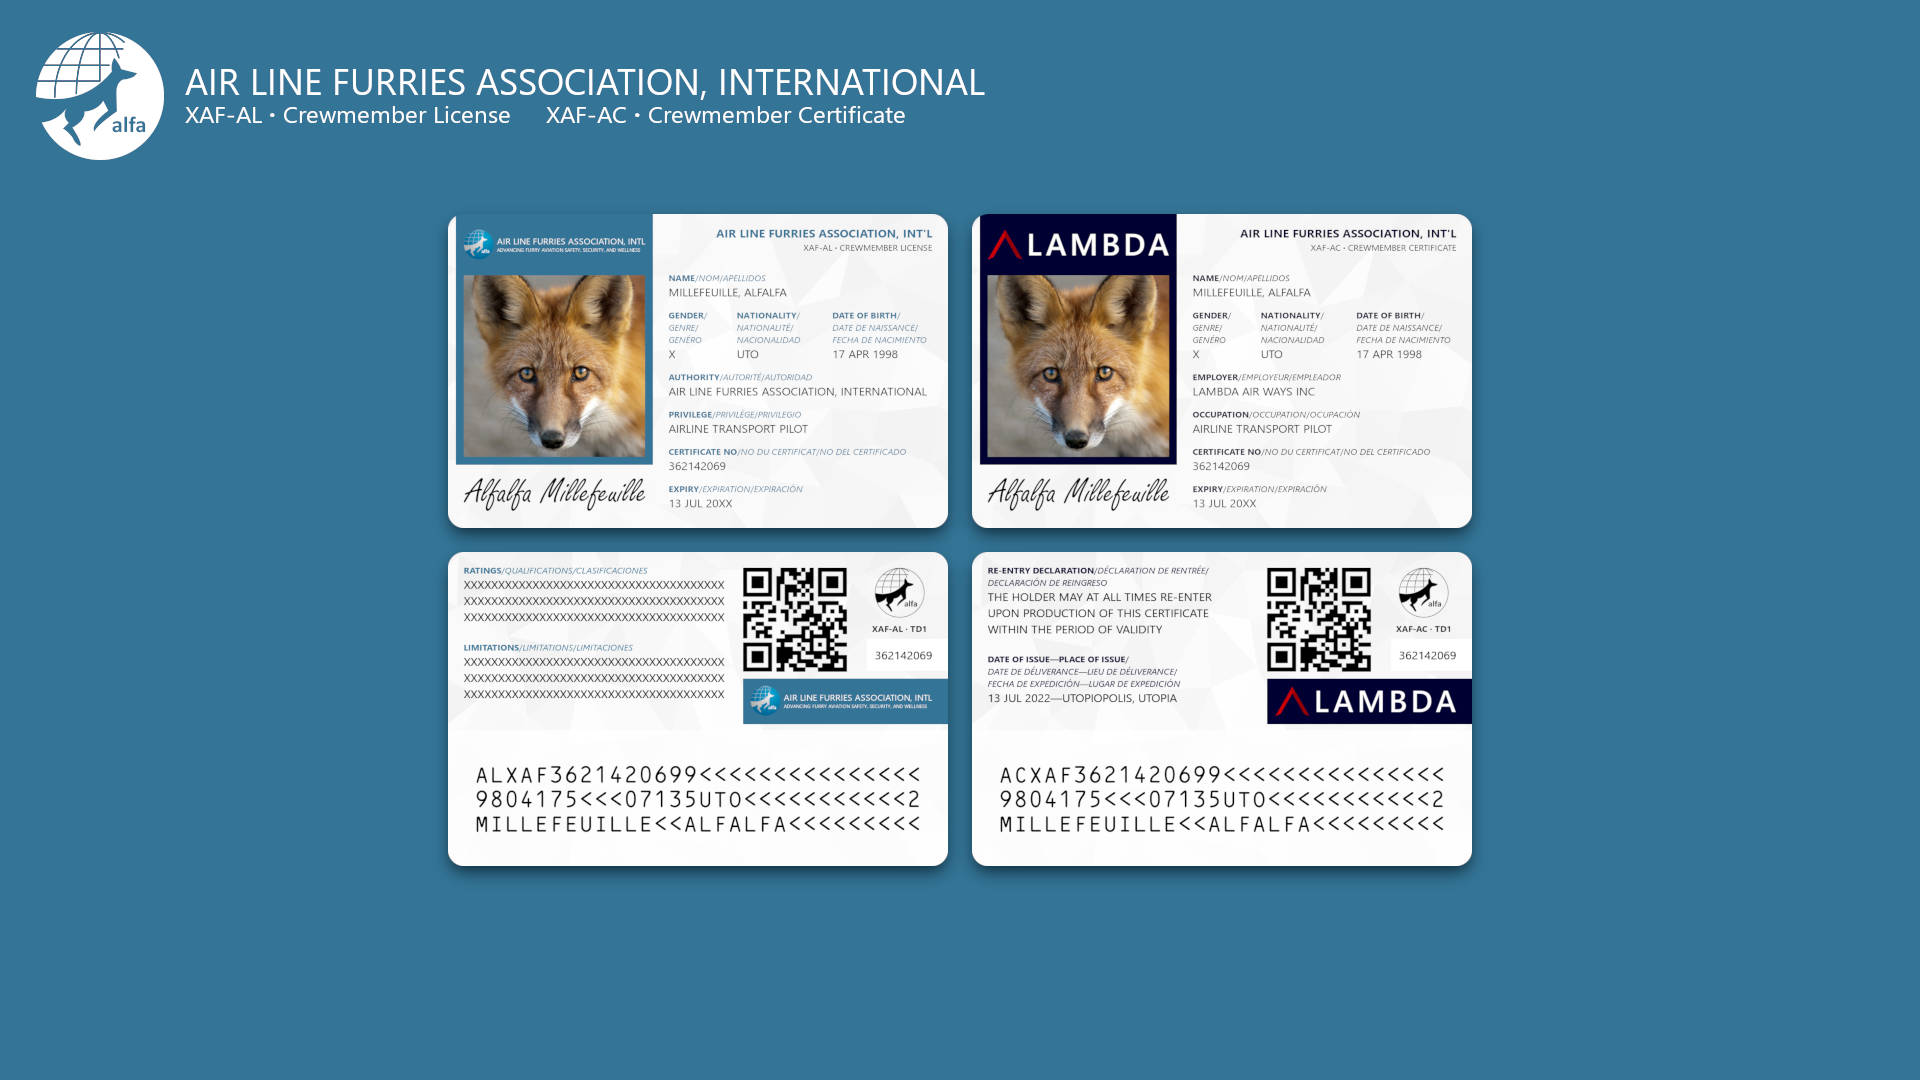 The front and back image of an ALFA-designed Crewmember License and Crewmember Certificate, the license on the left and the certificate on the right. The front of each card is on the top while the bottom of each card is on the bottom. The front of each card shows all the information needed for visual inspection, a signature by the certificate holder, and the holder's picture. The back of each card features machine-readable areas in the form of a Machine-Readable Zone (MRZ), a QR code, and additional information.